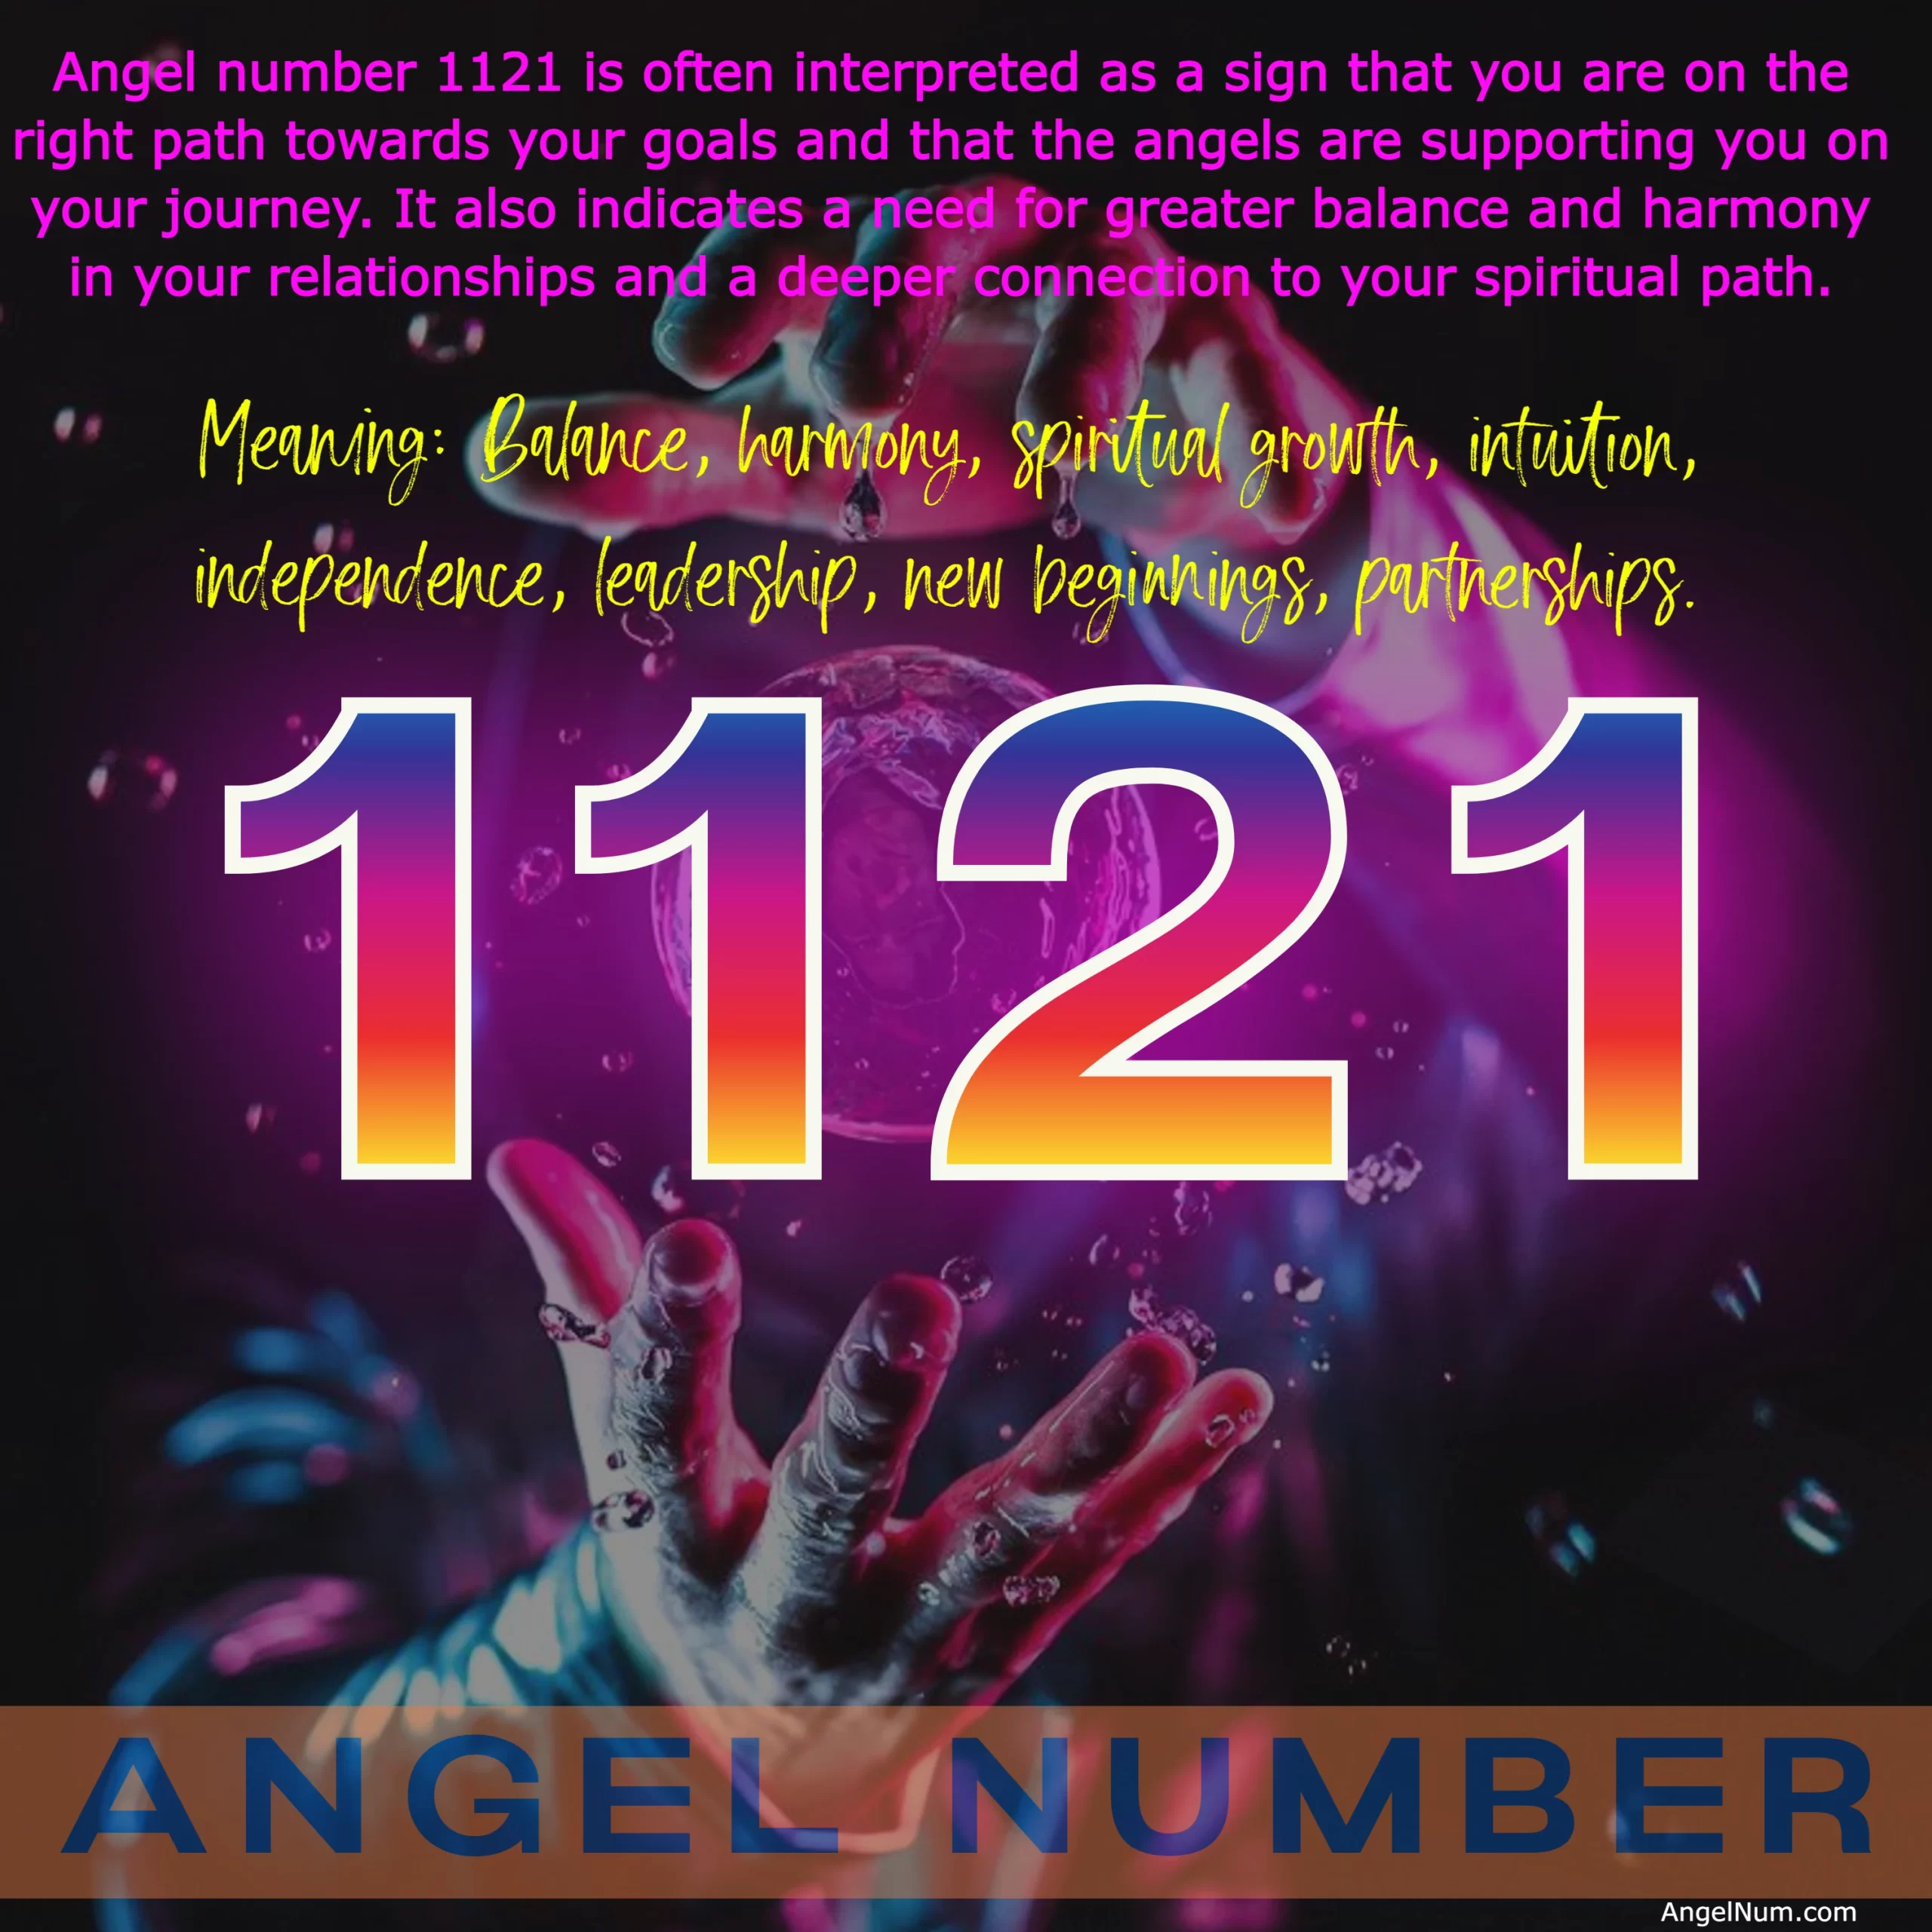 Angel Number 1121: Meaning, Symbolism, and Significance